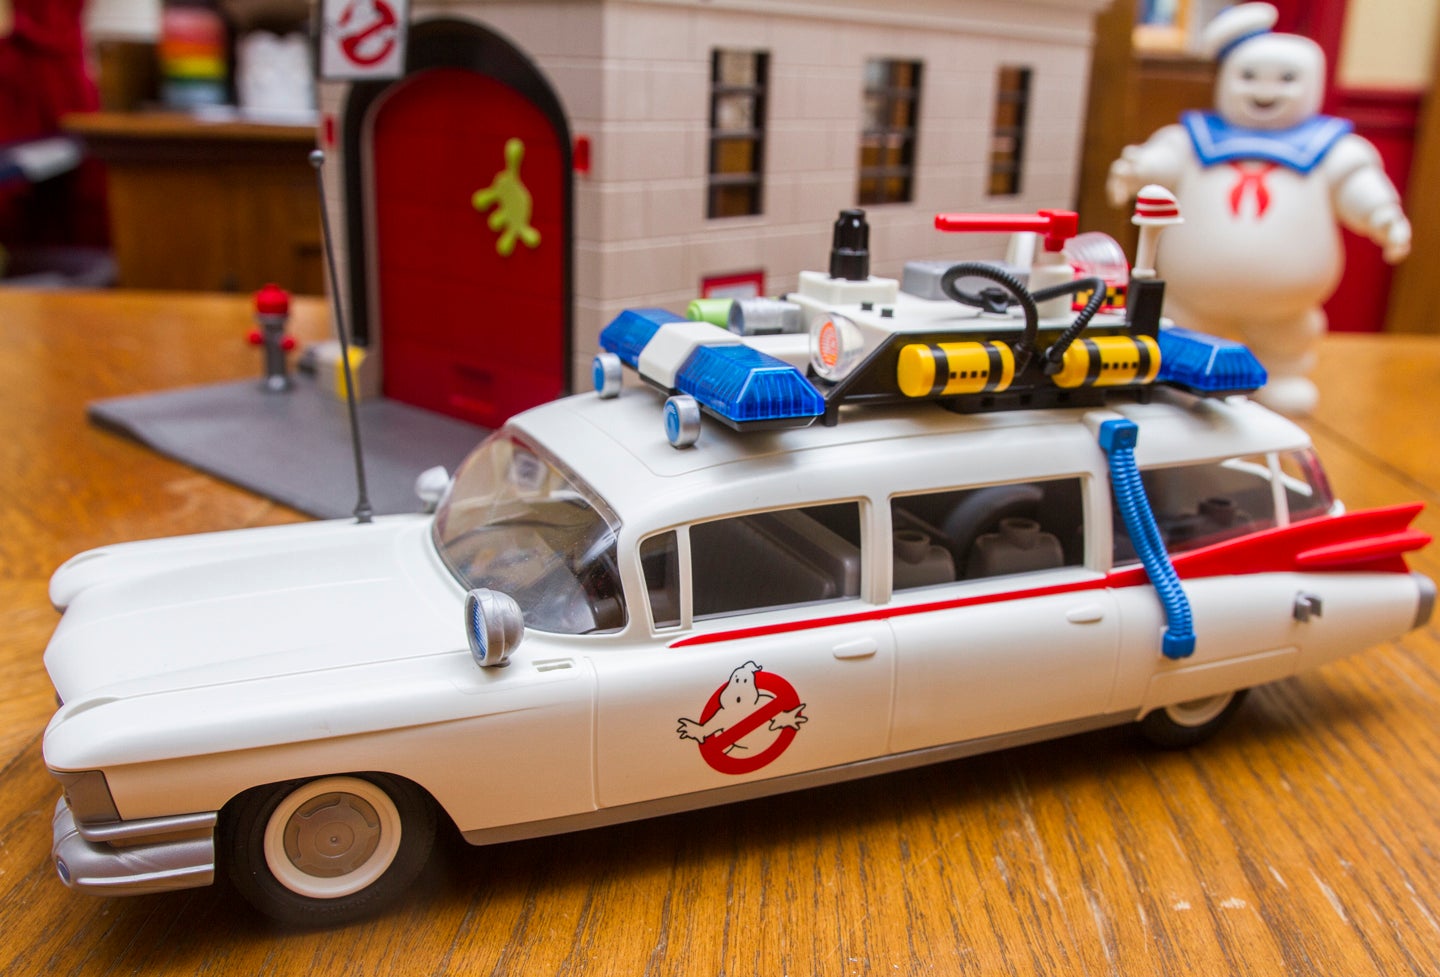 REVIEW: Playmobil Ecto and REAL Ghostbusters | Figures.com